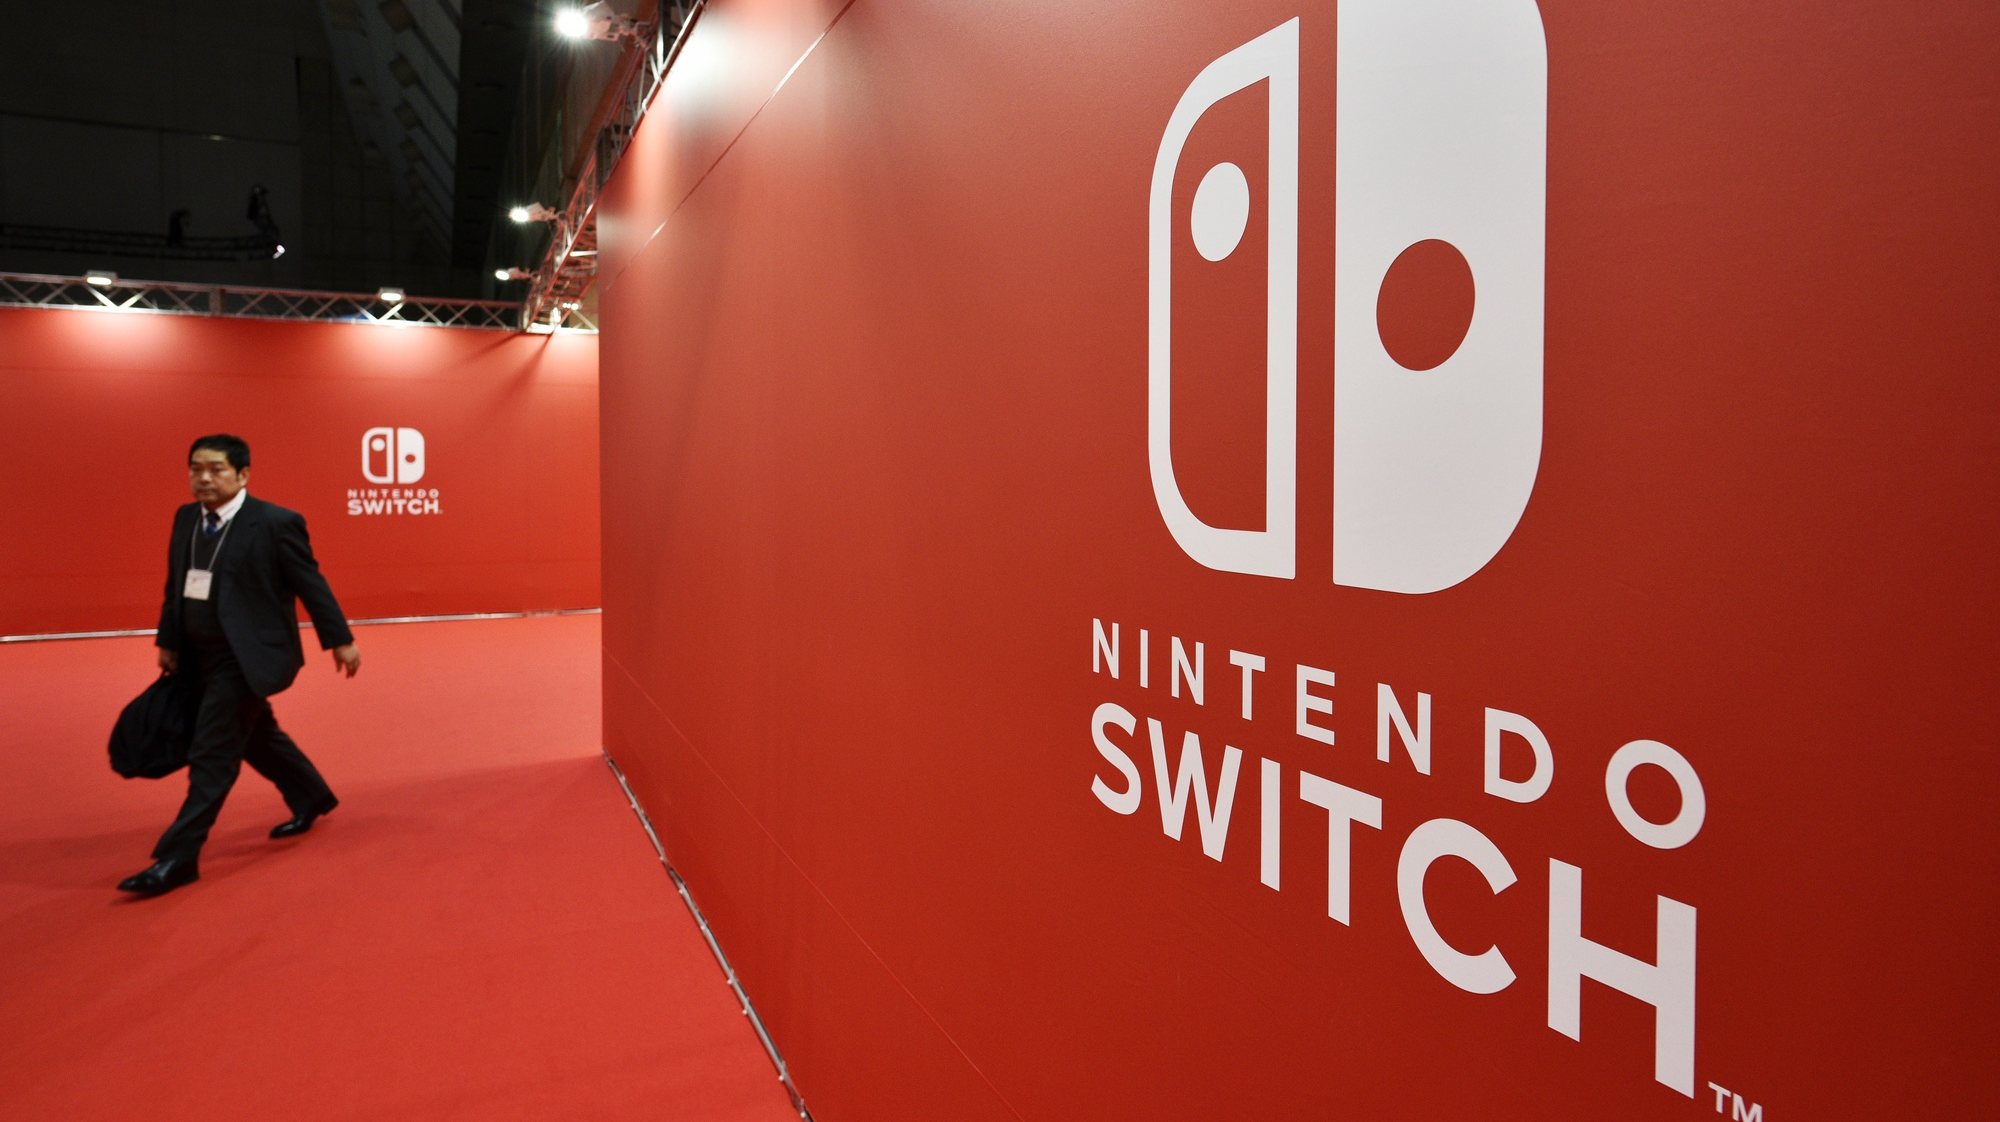 epa09180302 (FILE) - A man walks past the Nintendo Switch logo during the Nintendo Switch Presentation 2017 in Tokyo, Japan, 13 January 2017 (reissued 06 May 2021). On 06 May 2021, Nintendo Co. announced that its consolidated financial results for the fiscal year ended March 2021 reached a record high with net income of 4.4 billion USD, up 85.7 percent from the previous year thanks to strong sales of its Switch game console.  EPA/FRANCK ROBICHON